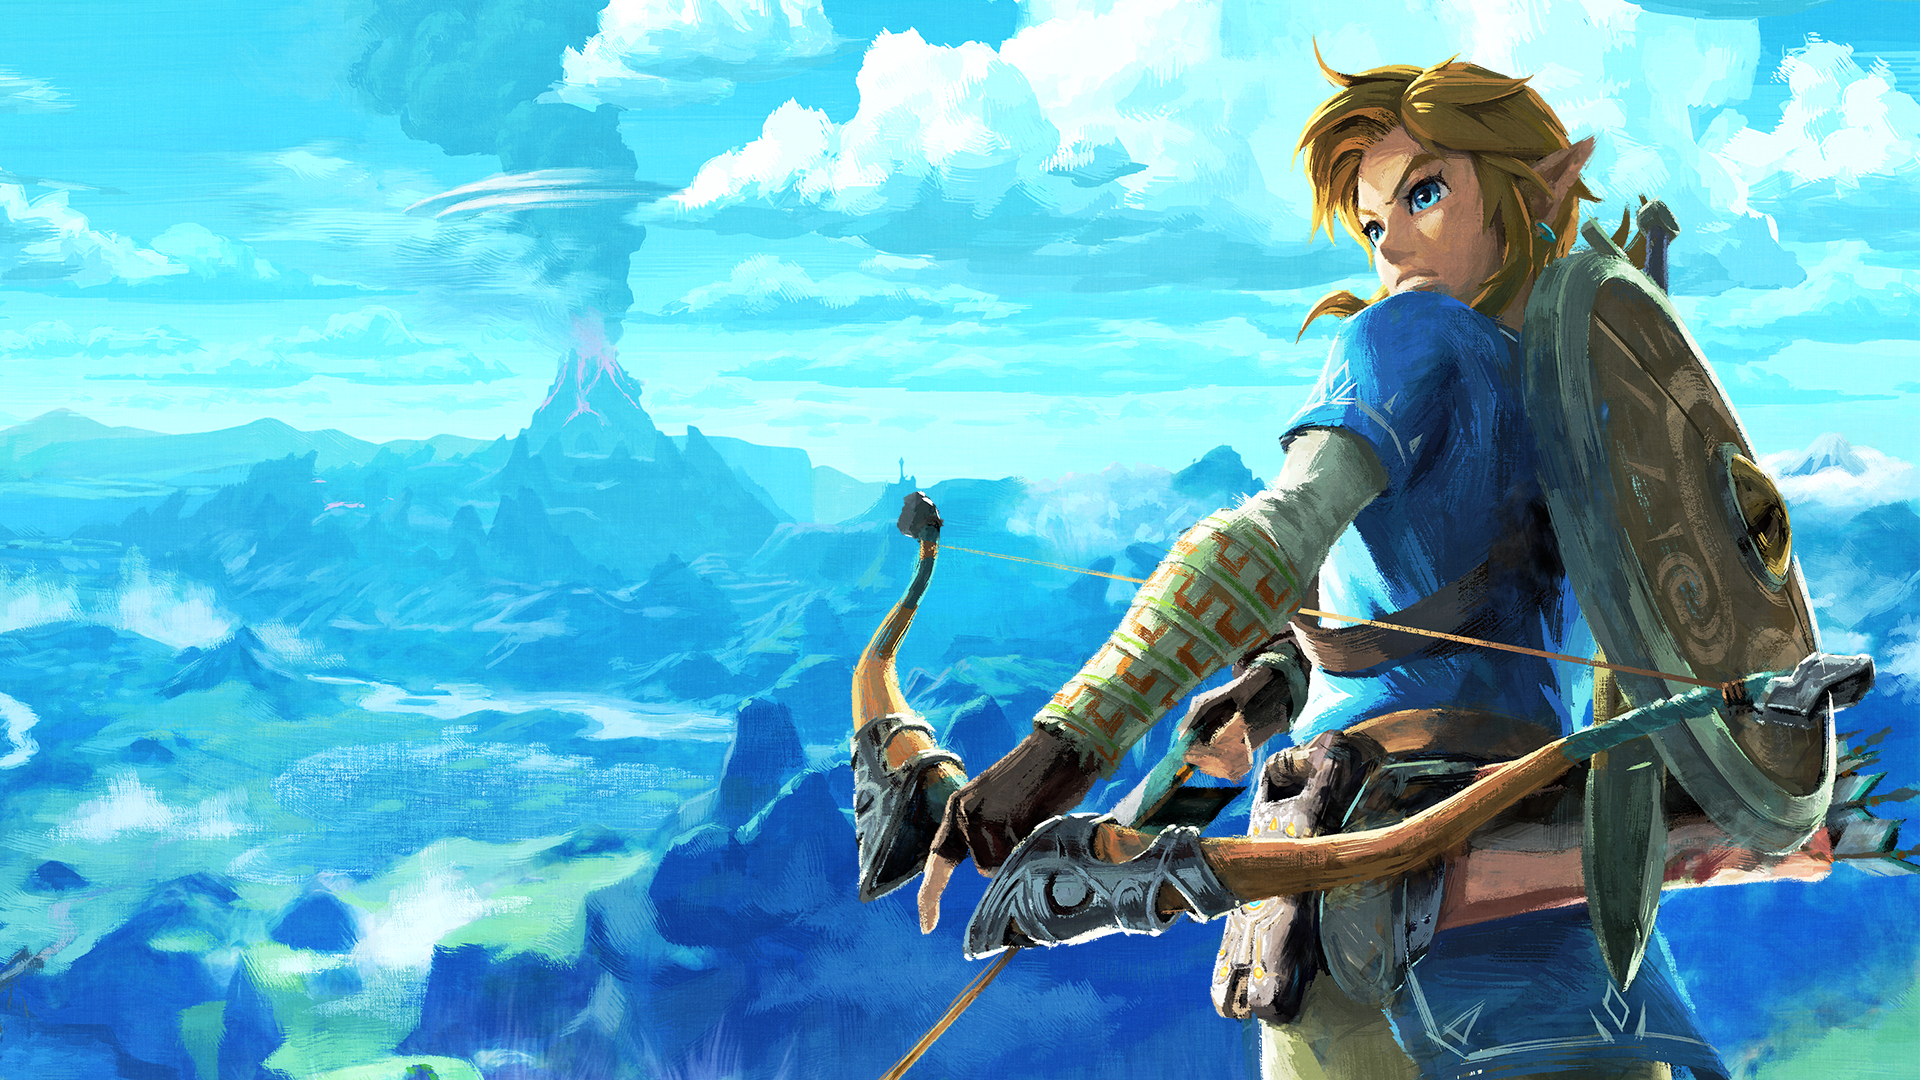 Sony and Nintendo team up for a live-action Legend of Zelda movie